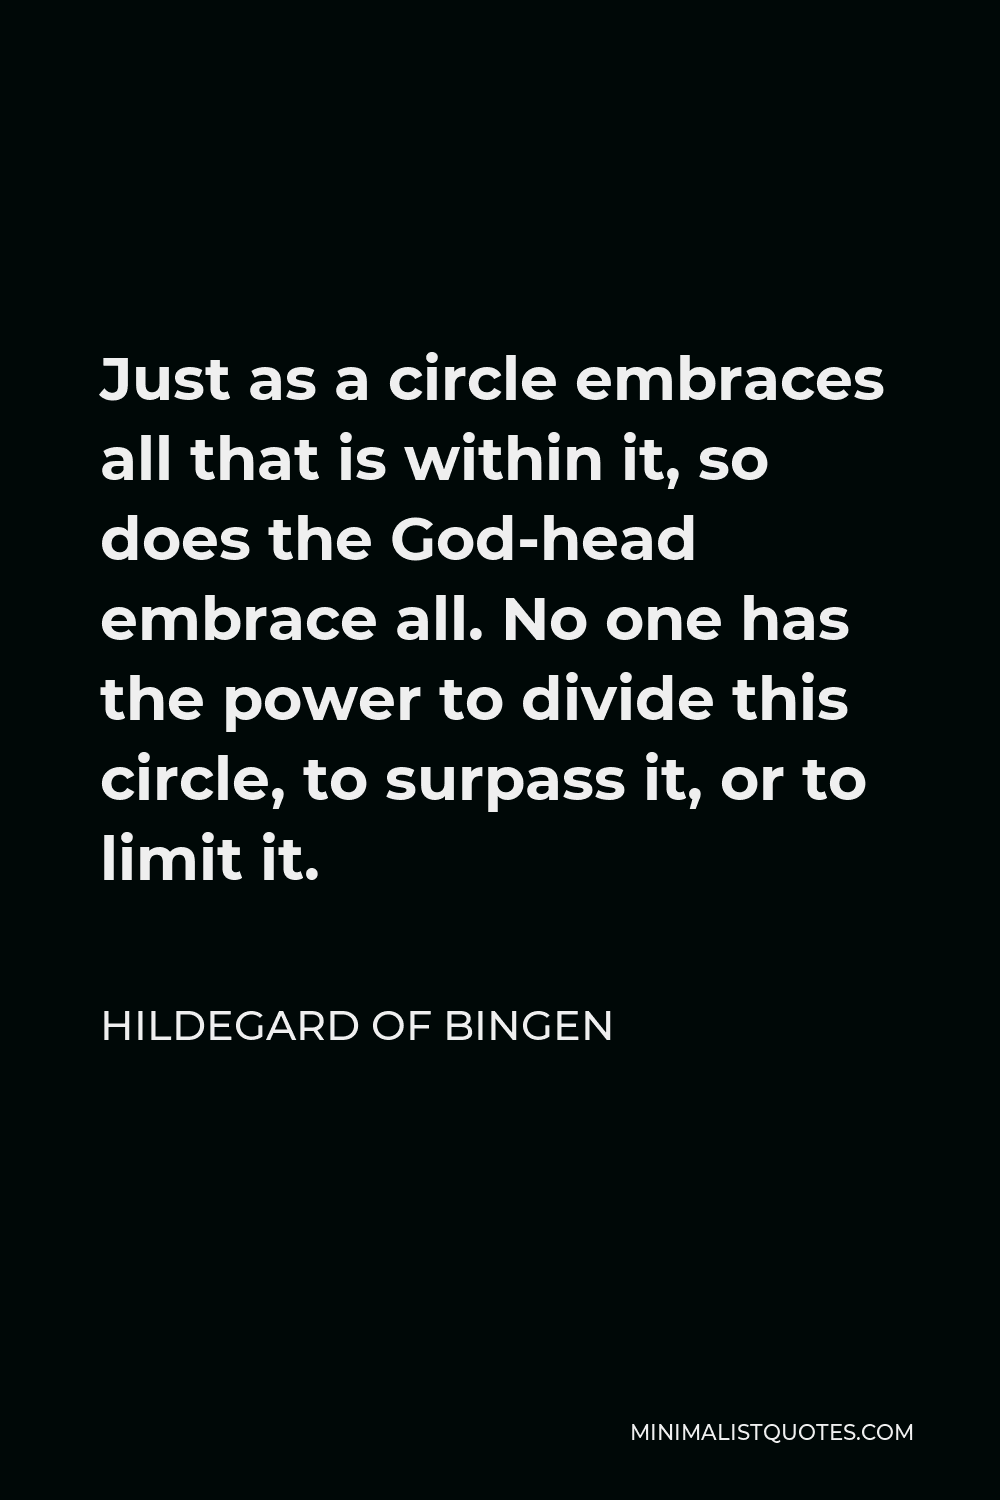 Hildegard of Bingen Quote - Just as a circle embraces all that is within it, so does the God-head embrace all. No one has the power to divide this circle, to surpass it, or to limit it.